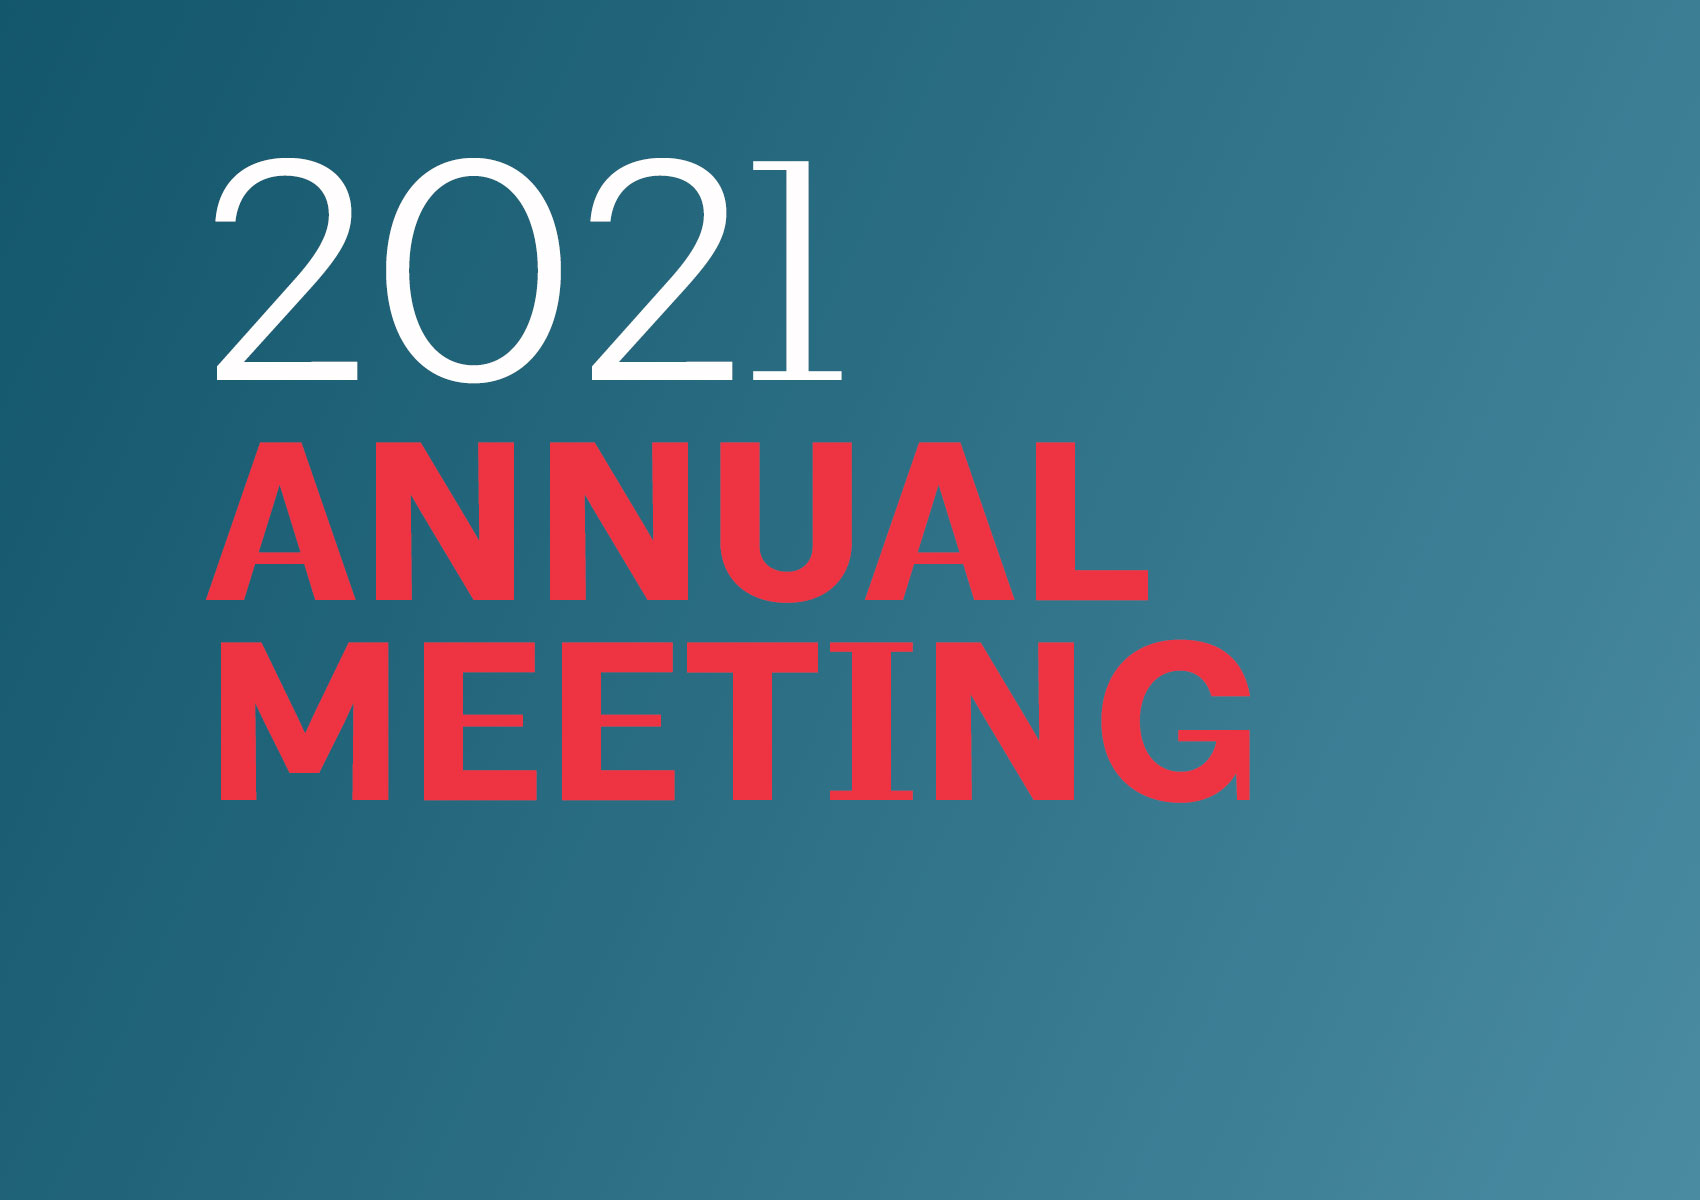 Member Congress and Annual Meeting